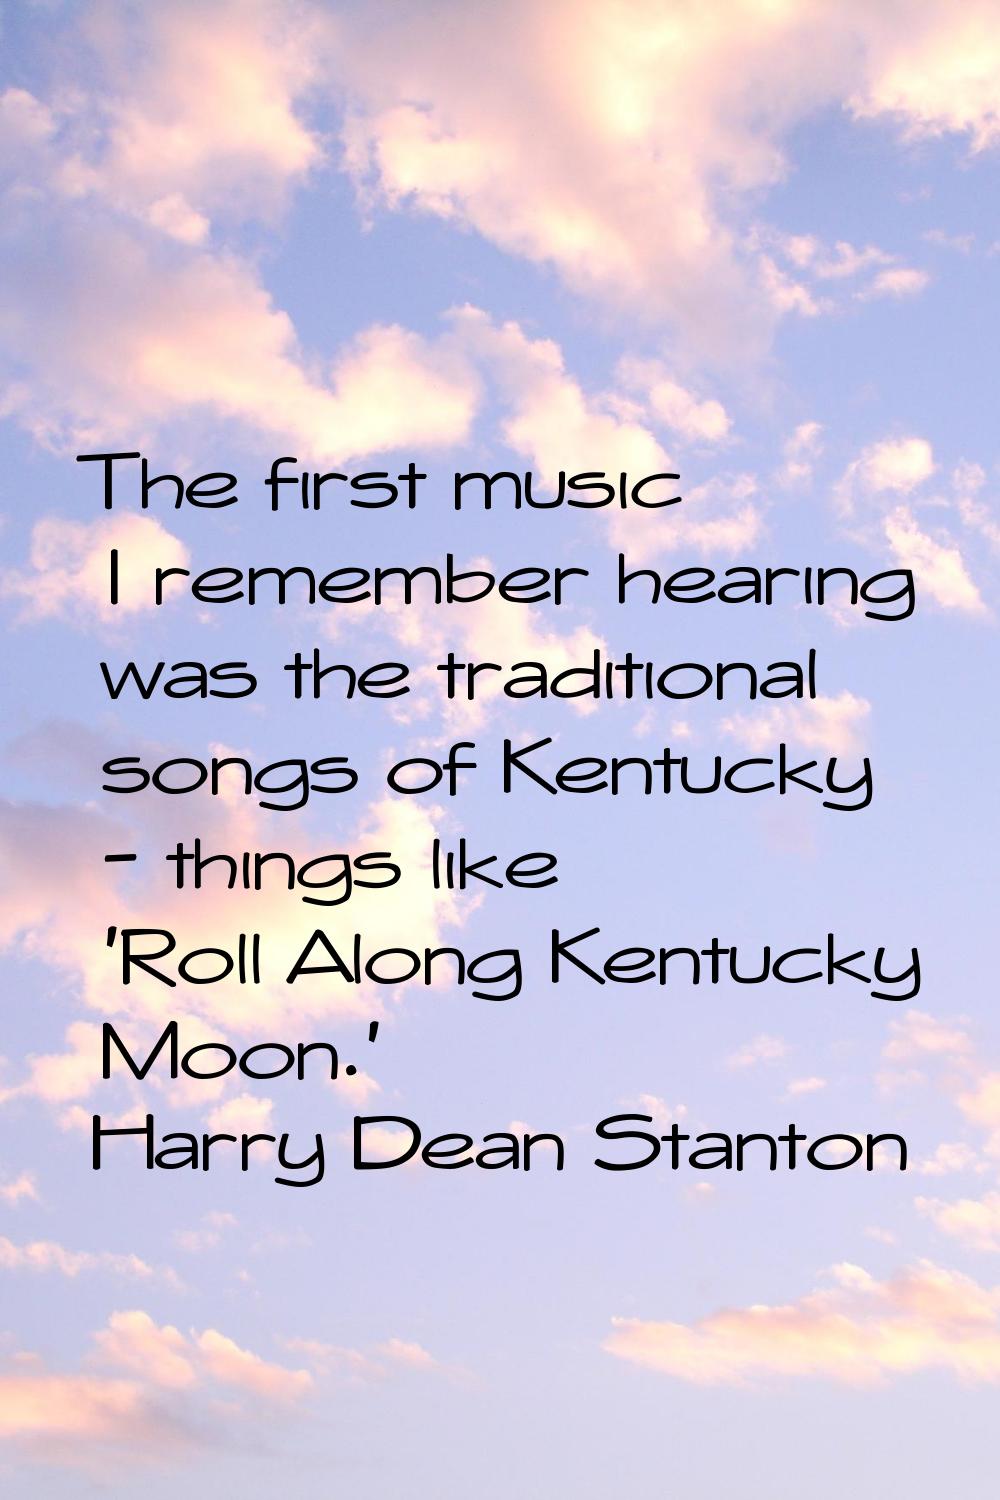 The first music I remember hearing was the traditional songs of Kentucky - things like 'Roll Along 